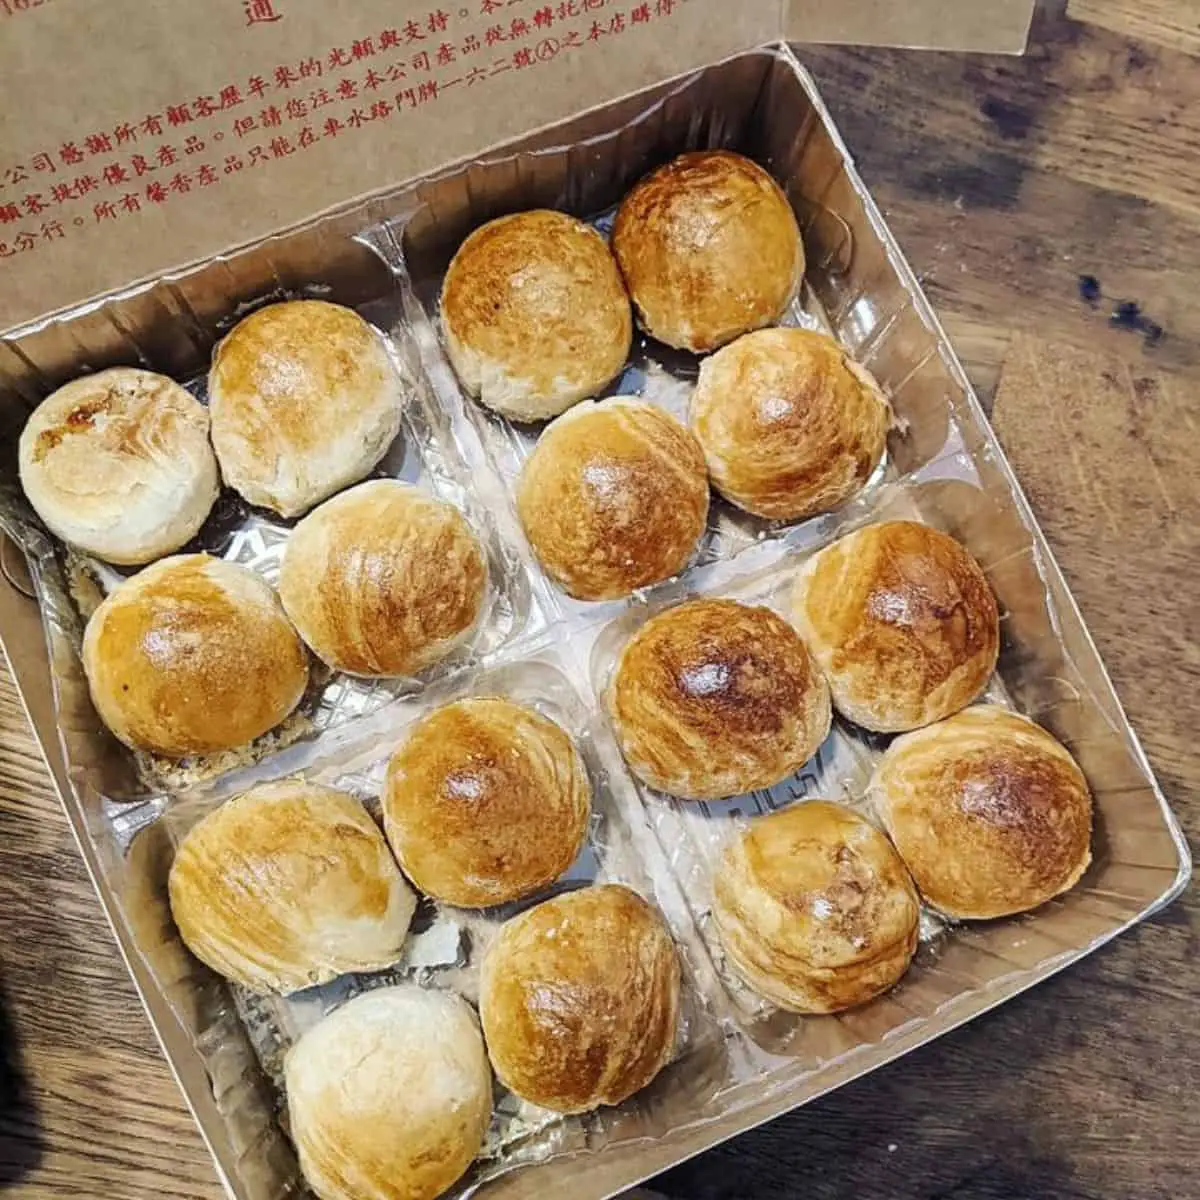 A brown box from Him Heang filled with mung bean pastry placed in a woody table